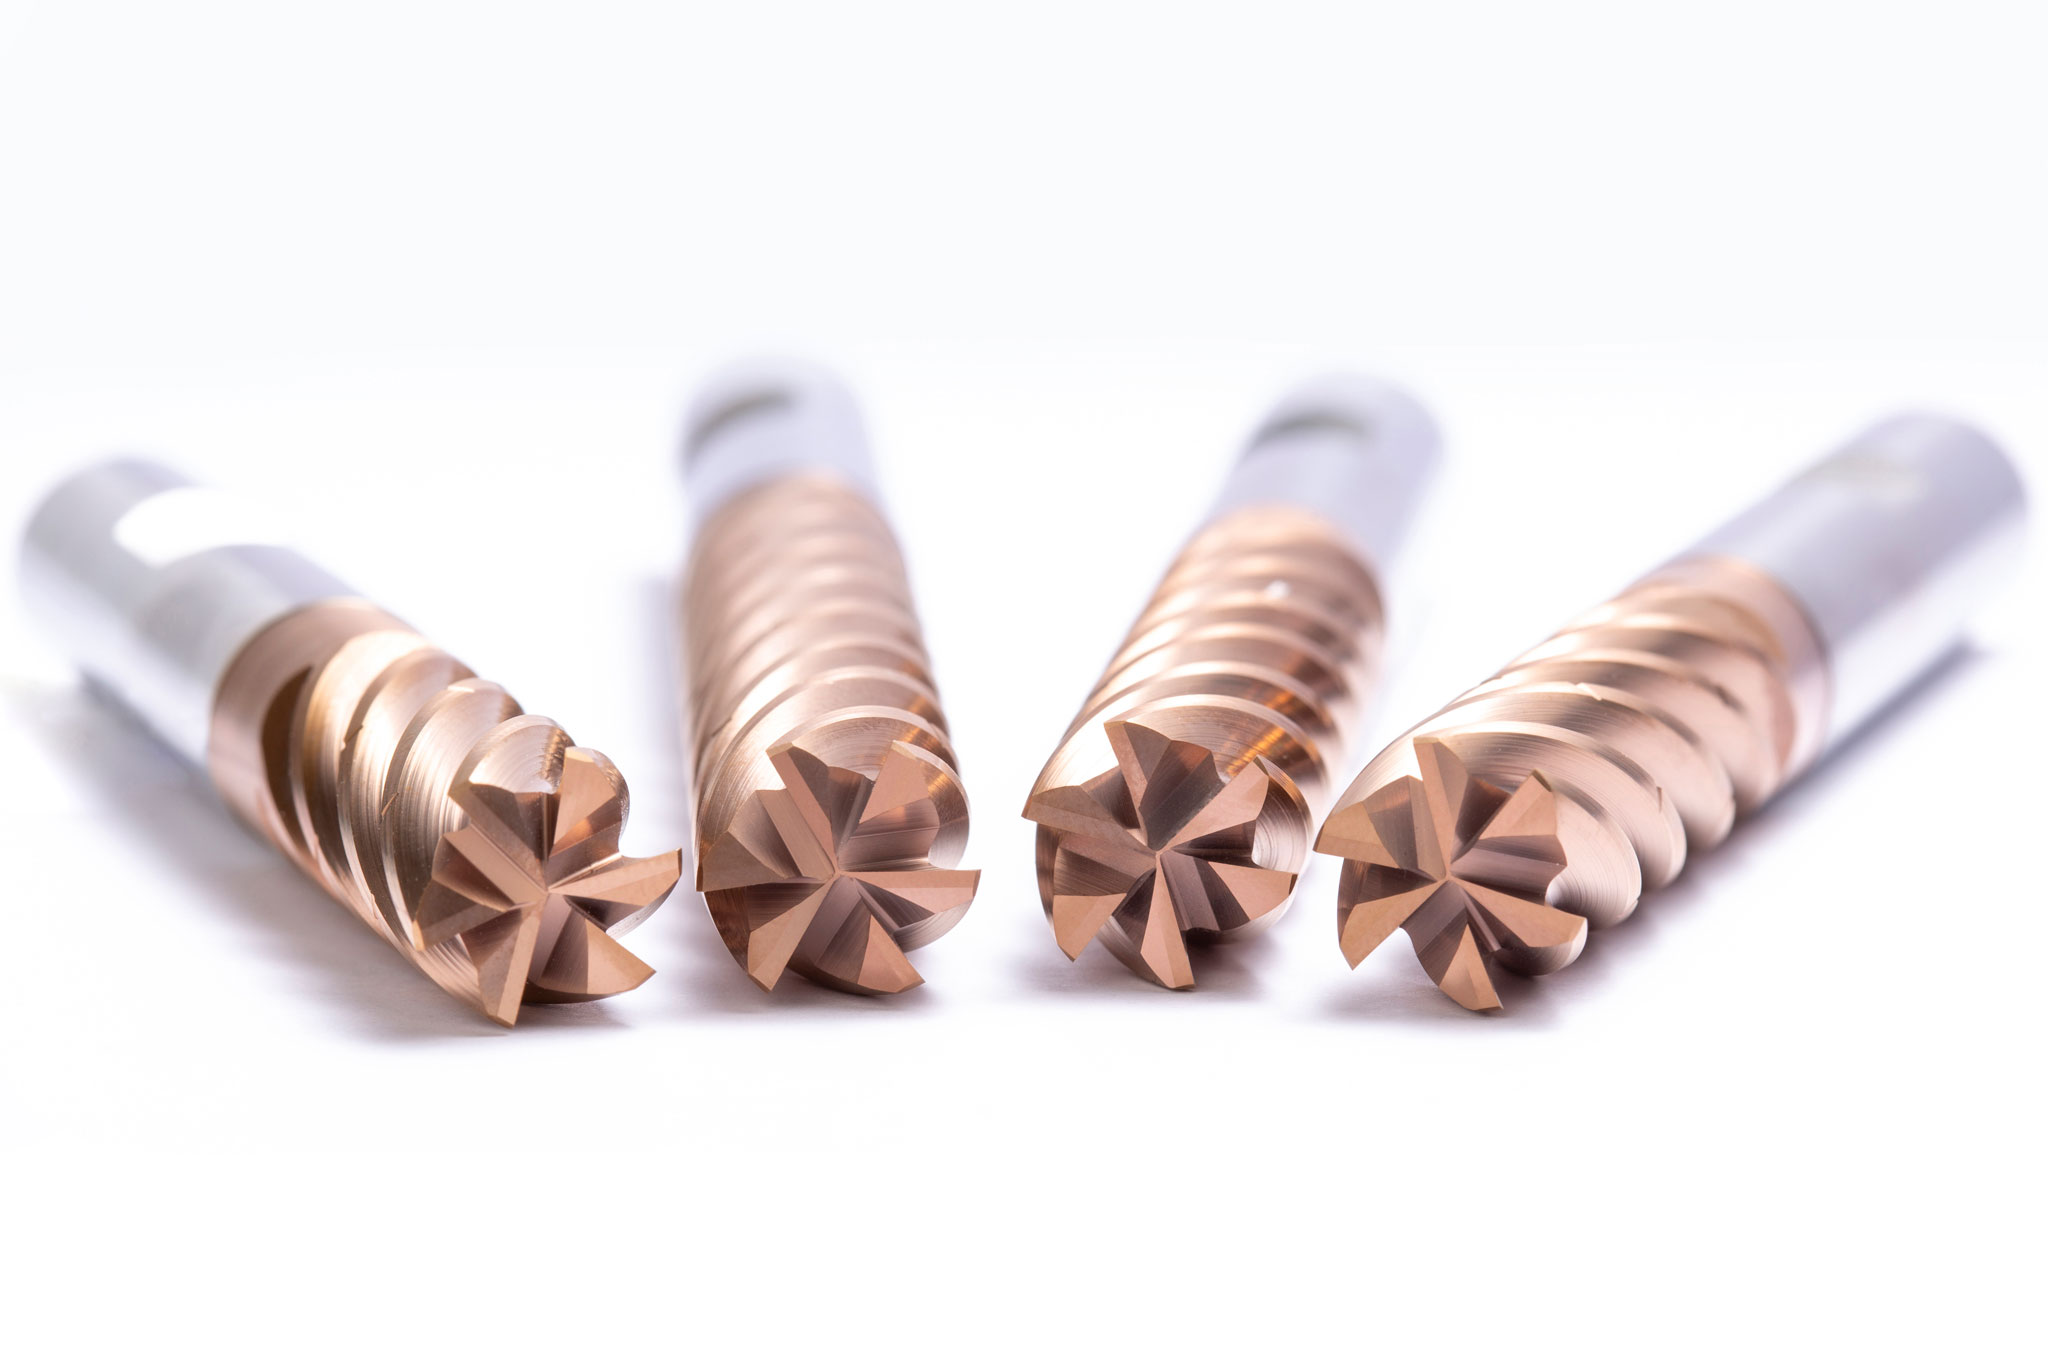 A group of four OptiMill-Tro-Inox trochoidal milling cutters arranged side by side.